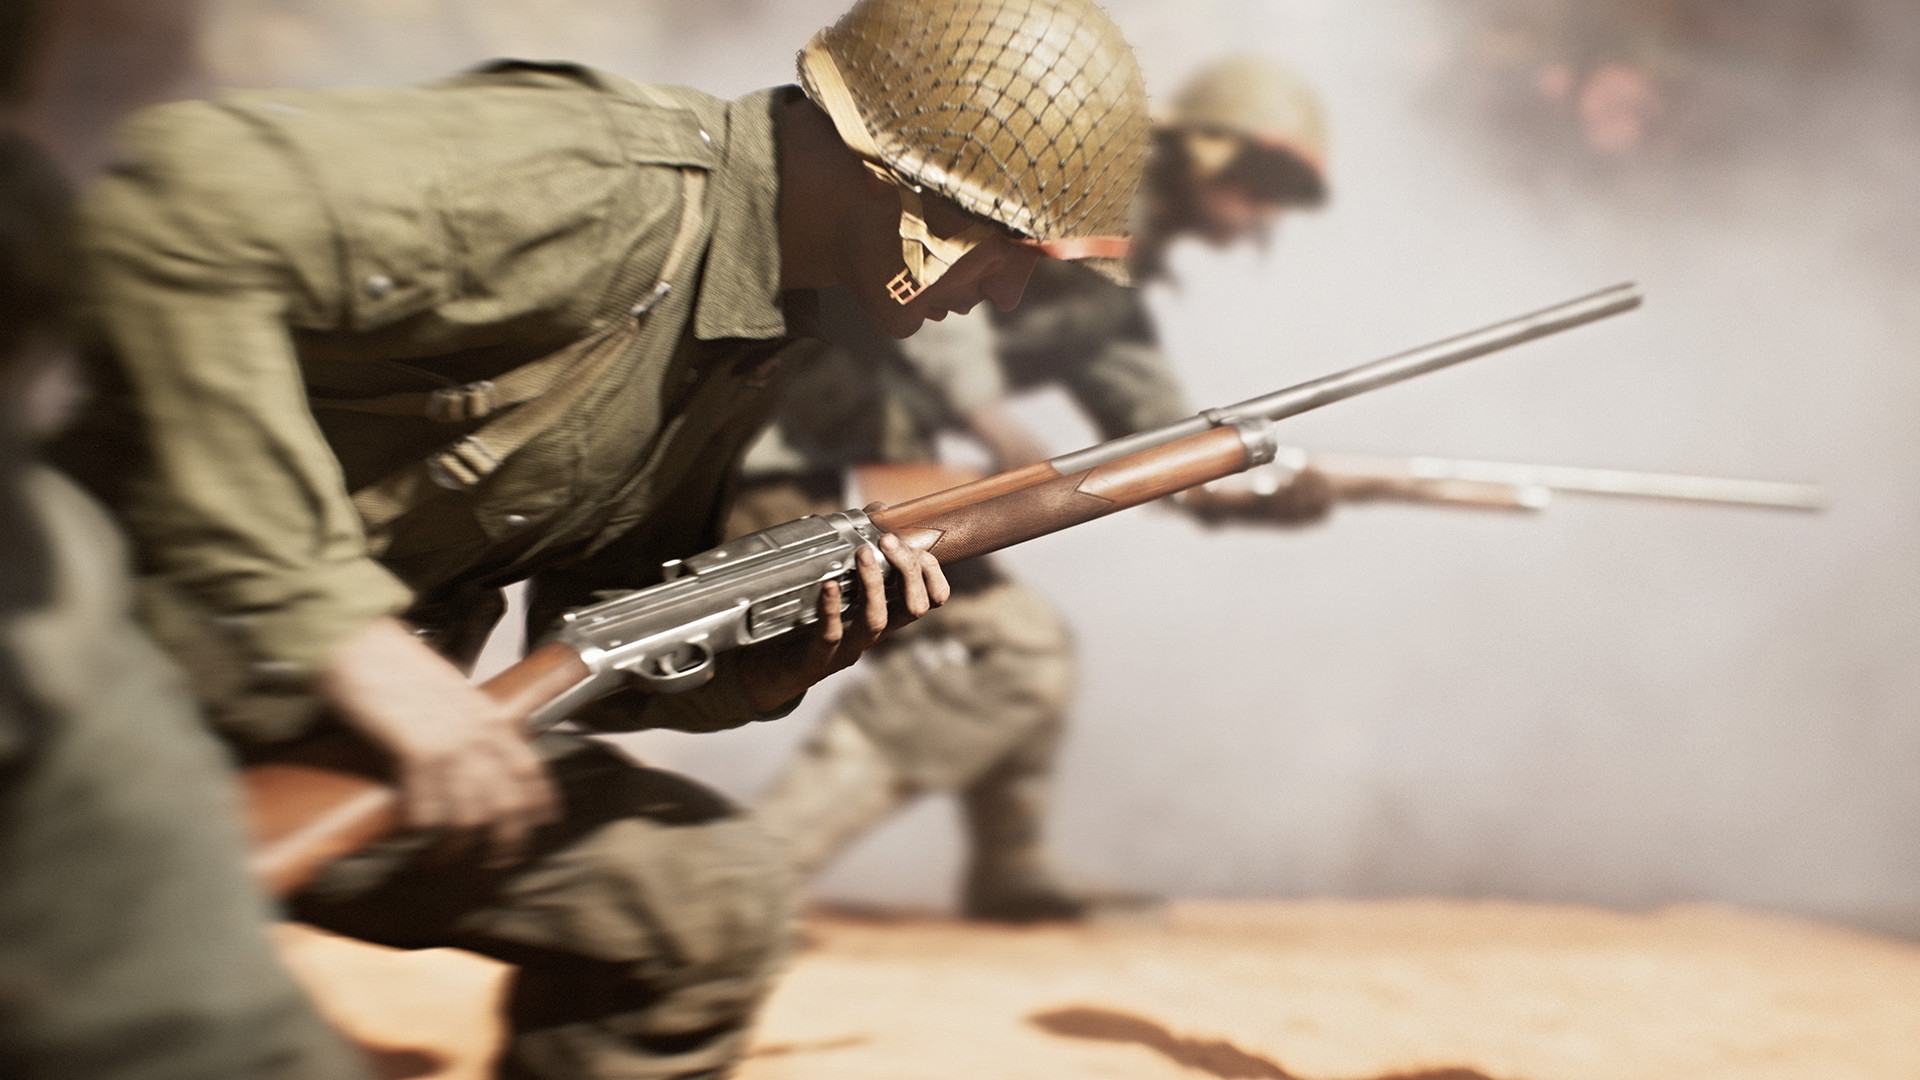 Today, we'll be covering the Battlefield games system requirements for all the games through 1 to 5, so you can know if your PC is up to the task. 